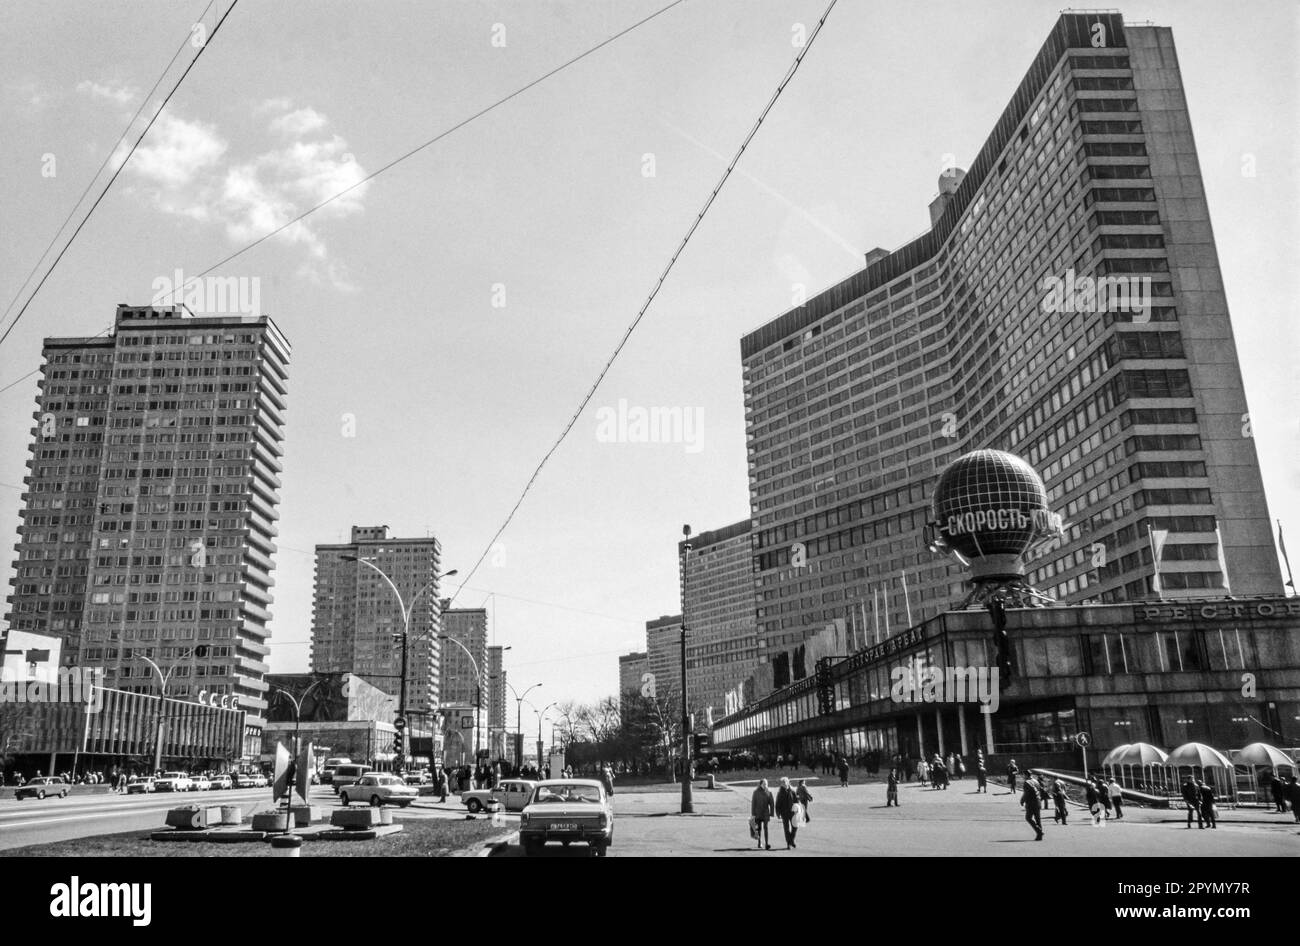 1988: The high-rise buildings on Kalinin Prospekt, now known as New Arbat Avenue, were completed in 1967 and ’68. Stock Photo